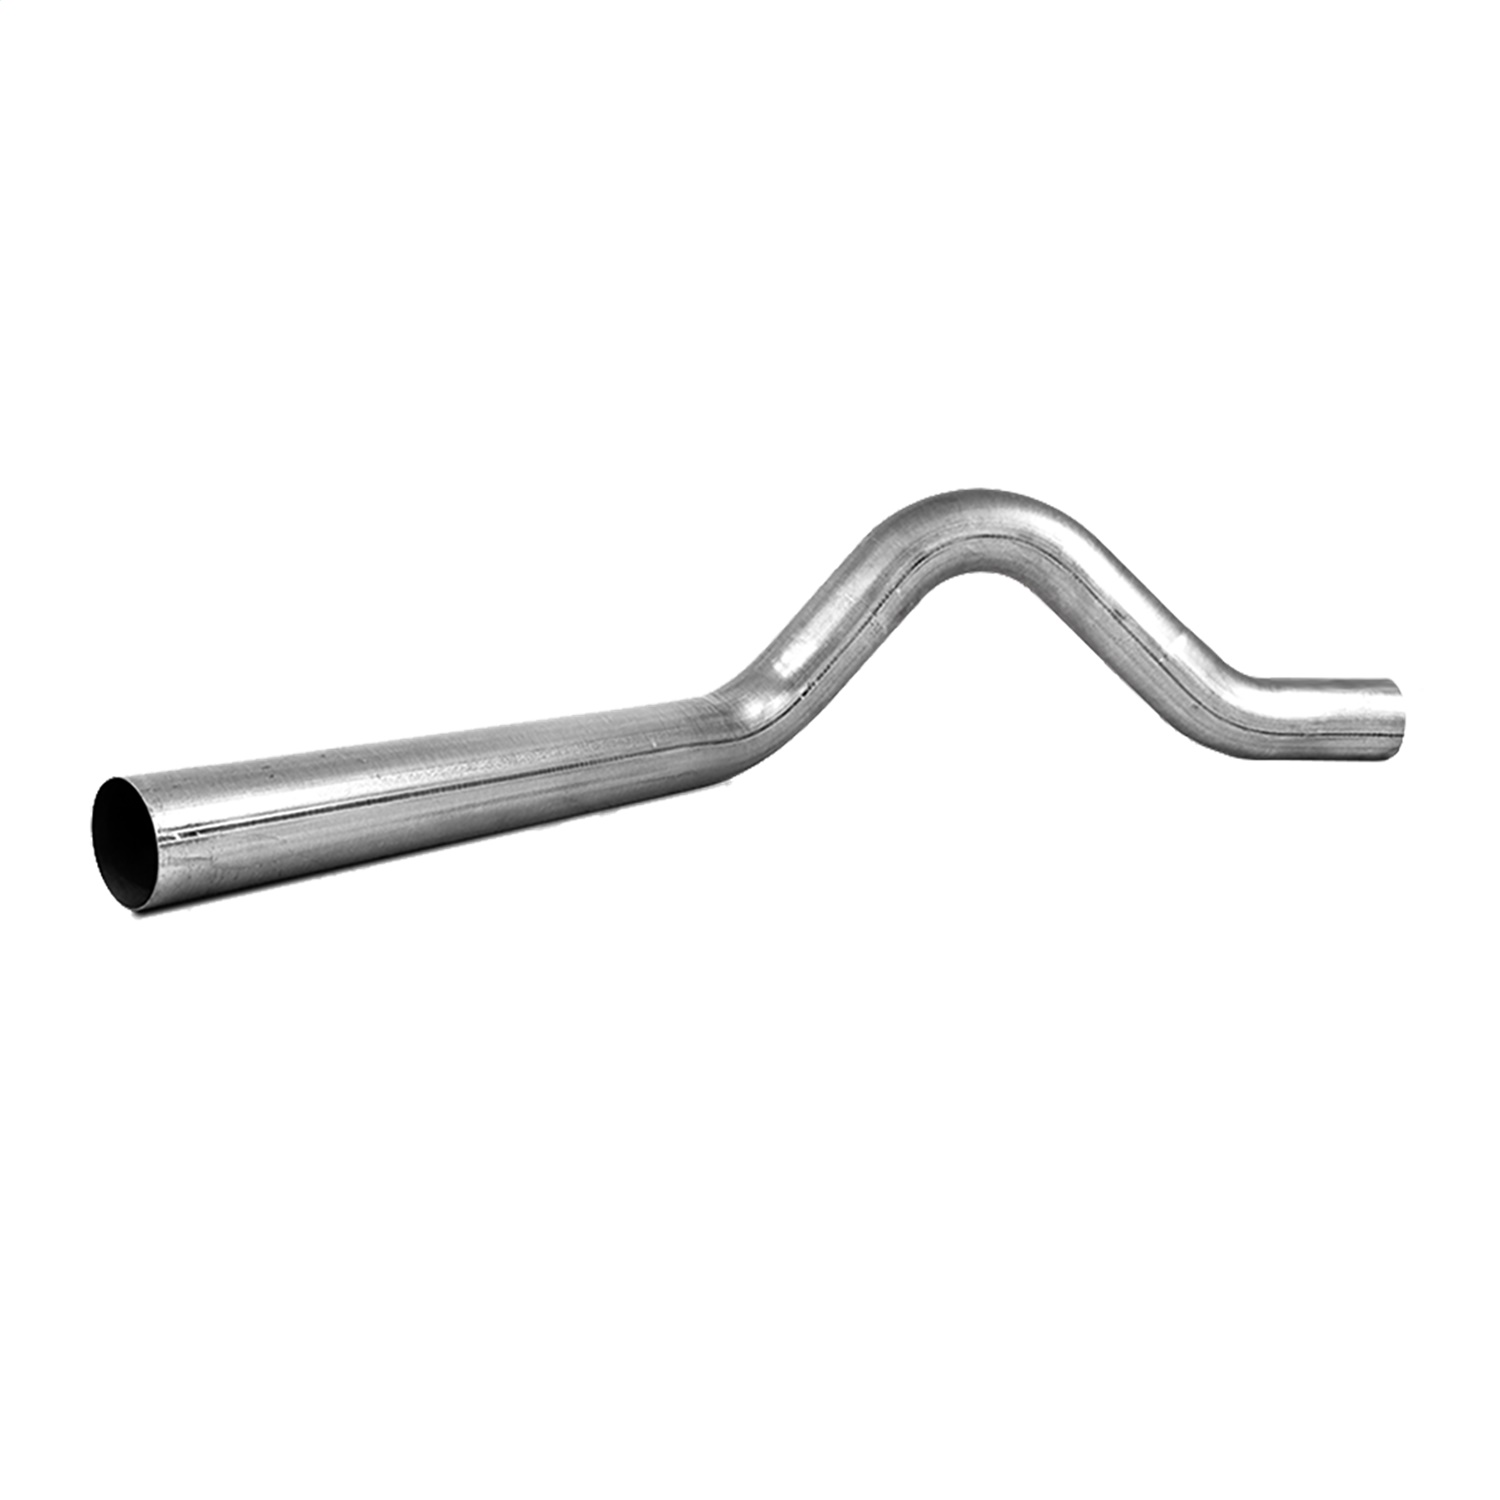 MBRP Exhaust GP004 Garage Parts Tail Pipe Fits F-250 Super Duty F-350 Super Duty